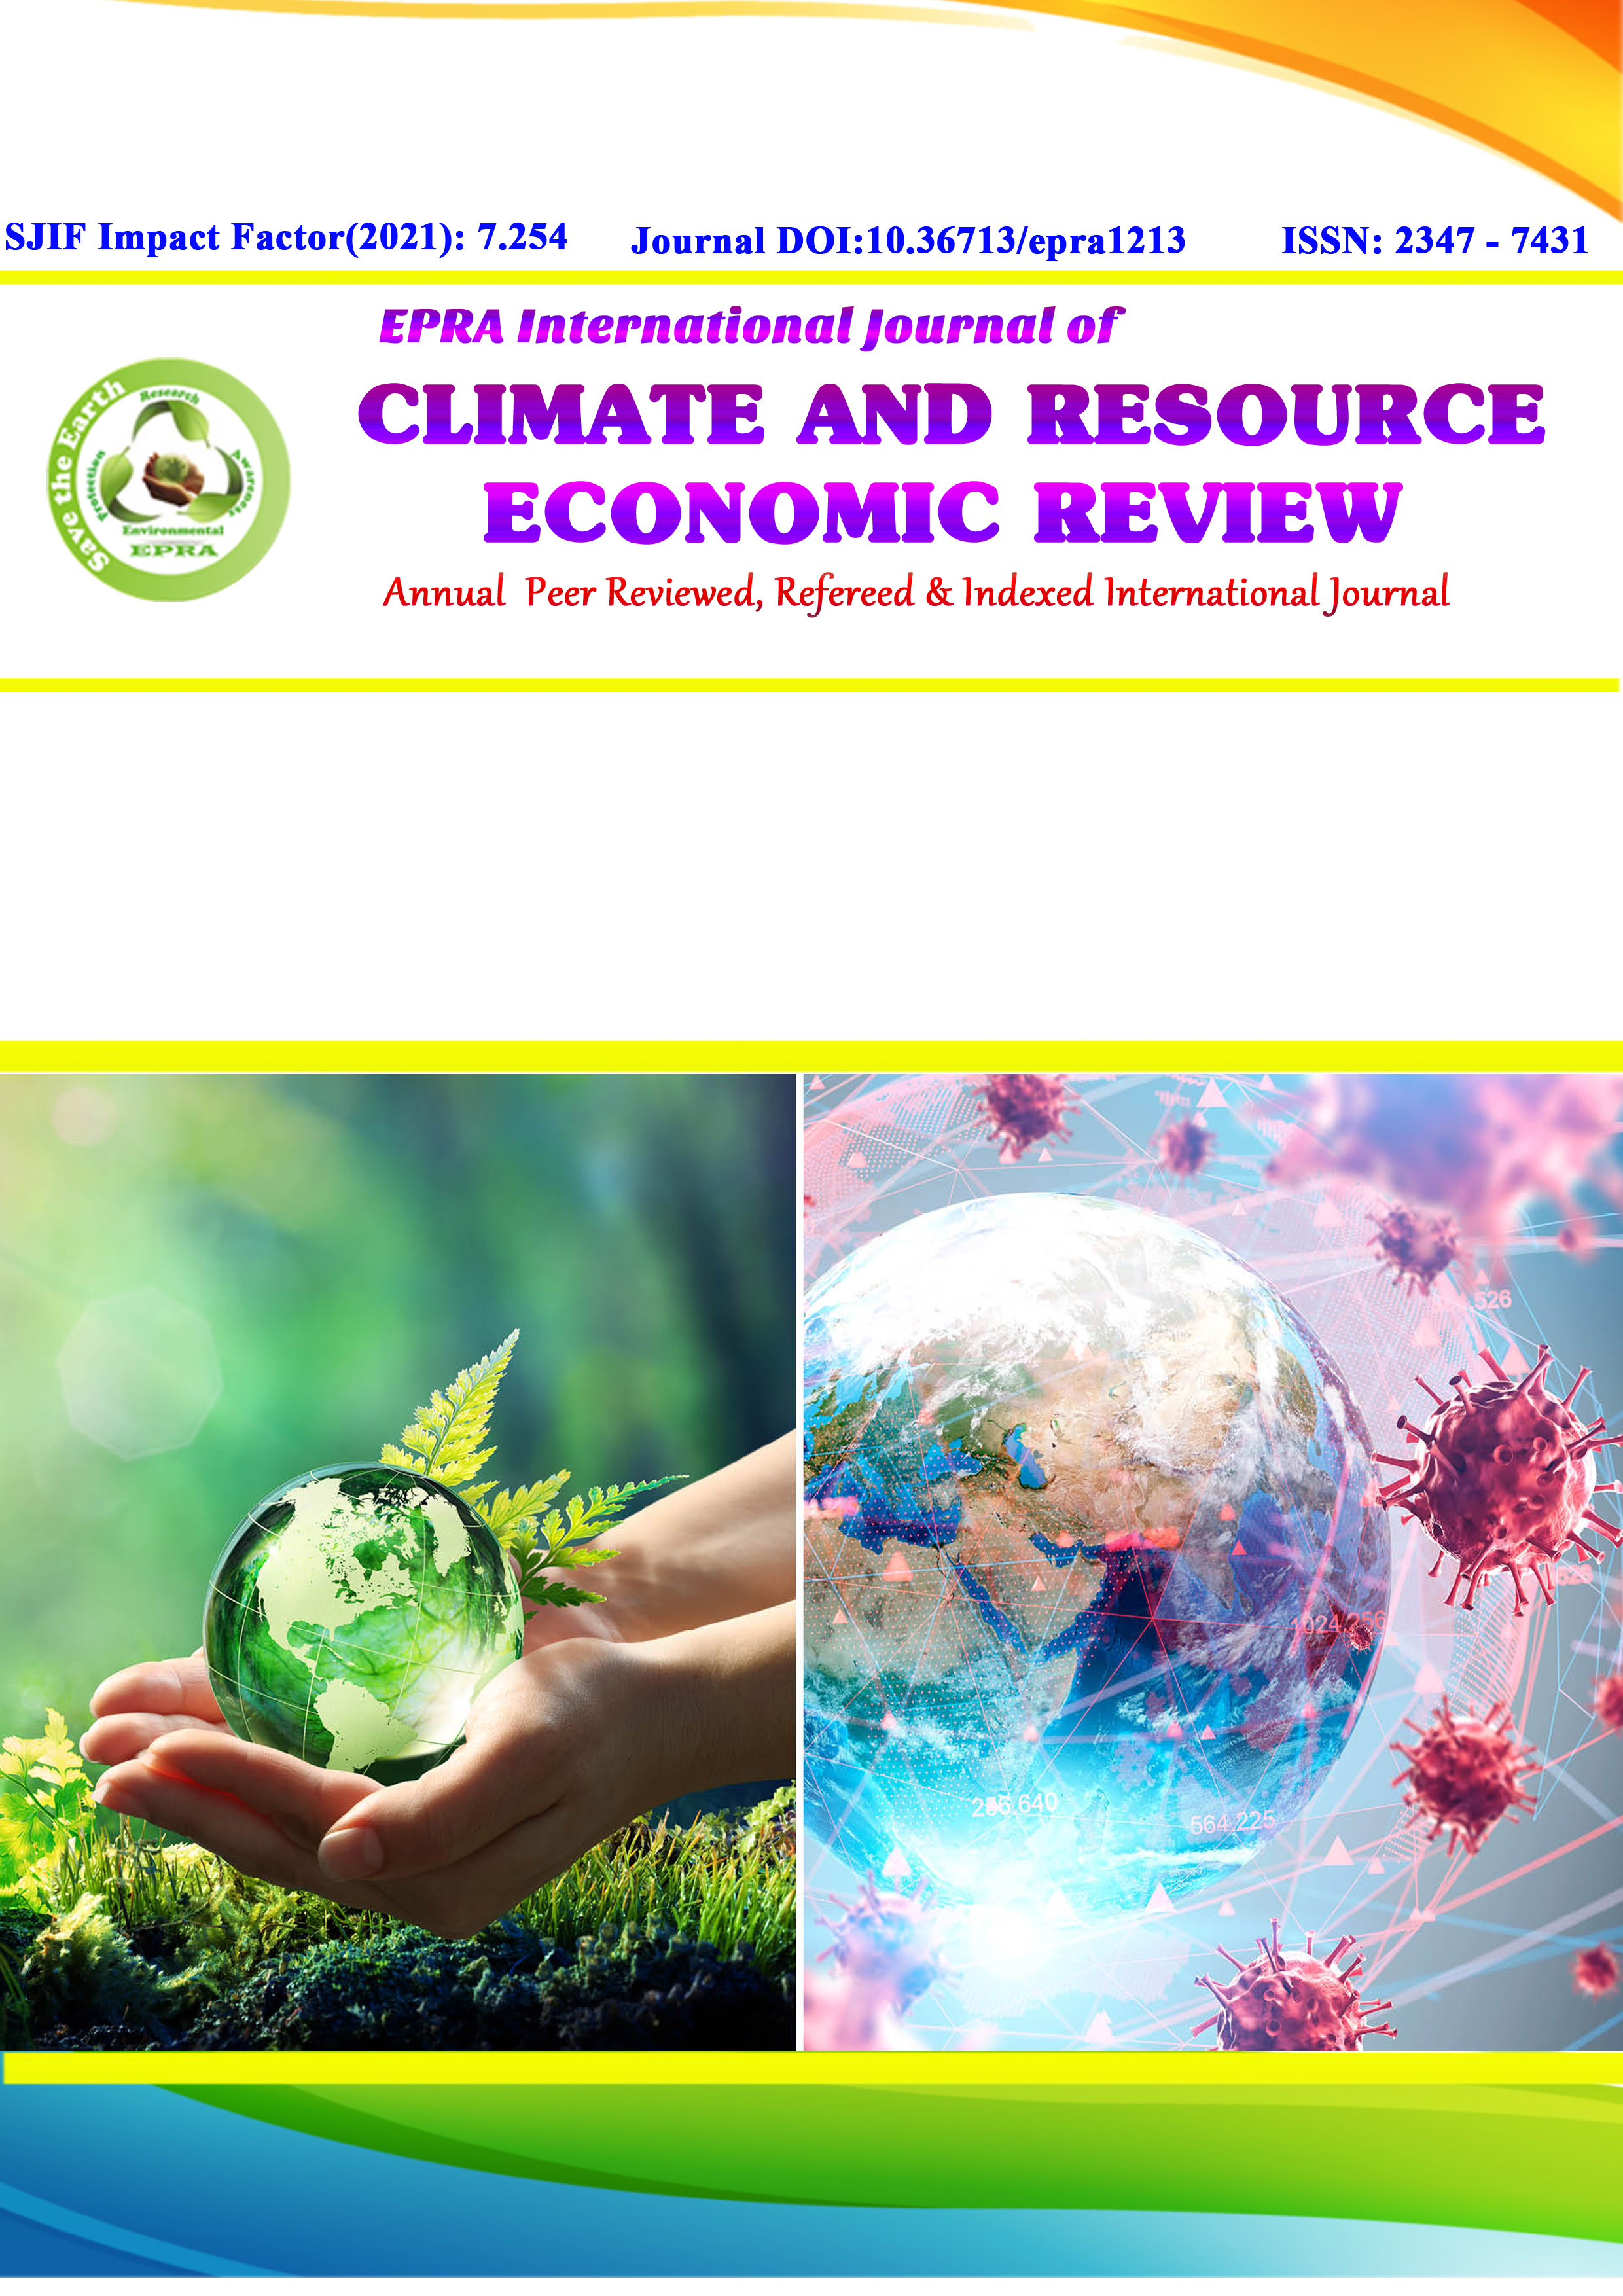 EPRA International Journal of Climate and Resource Economic Review (CRER)